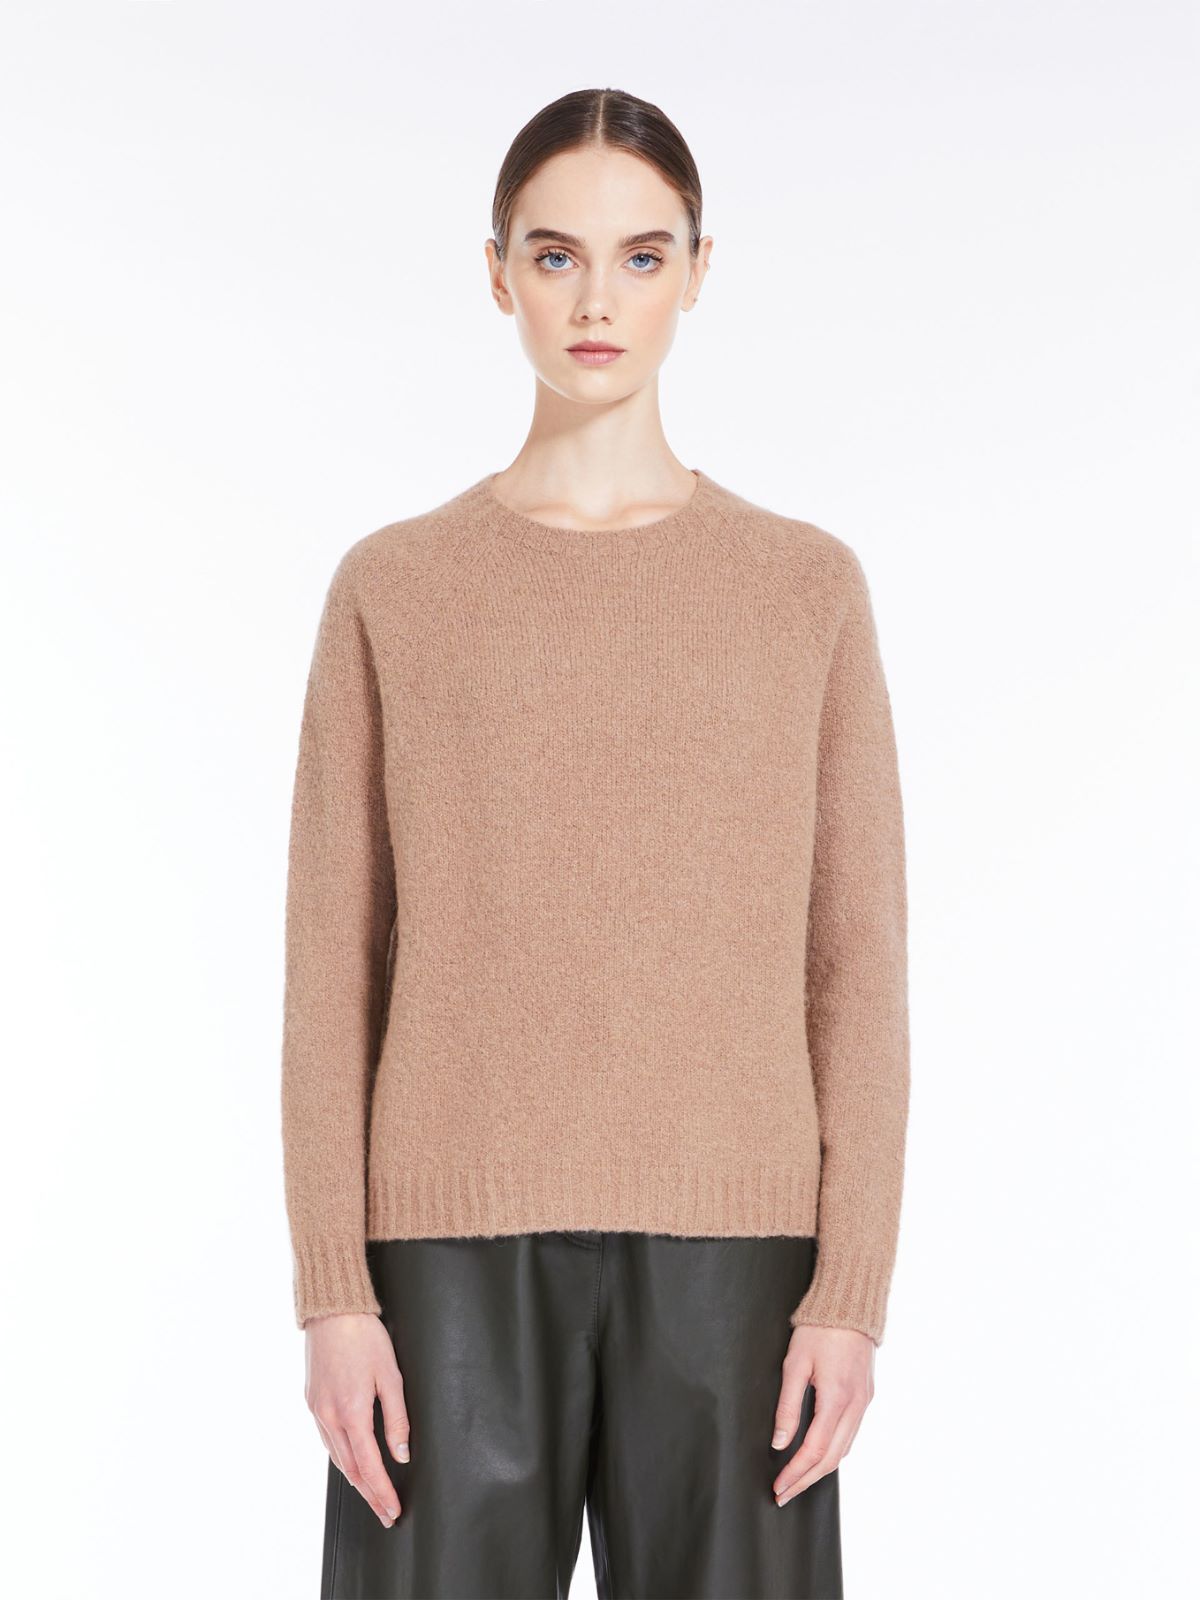 Soft knit top in alpaca and cotton - CAMEL - Weekend Max Mara - 2